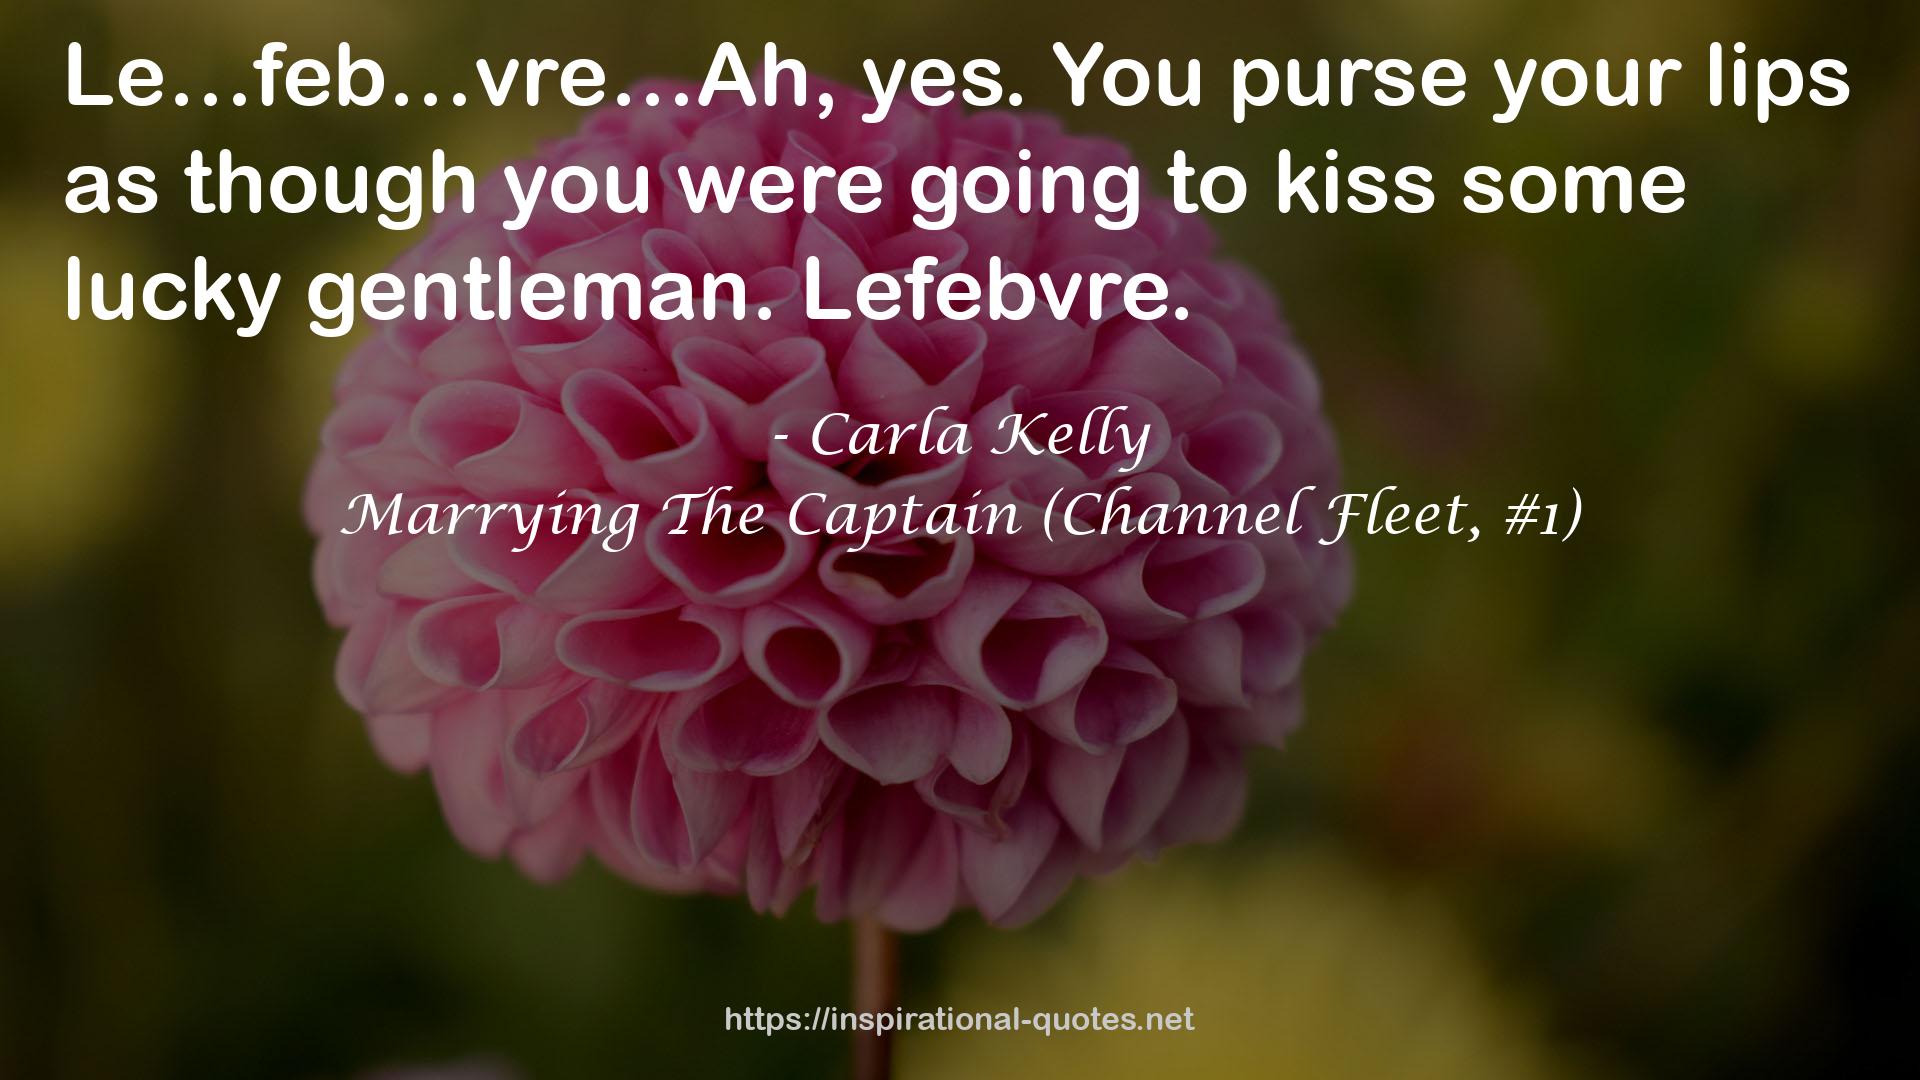 Marrying The Captain (Channel Fleet, #1) QUOTES